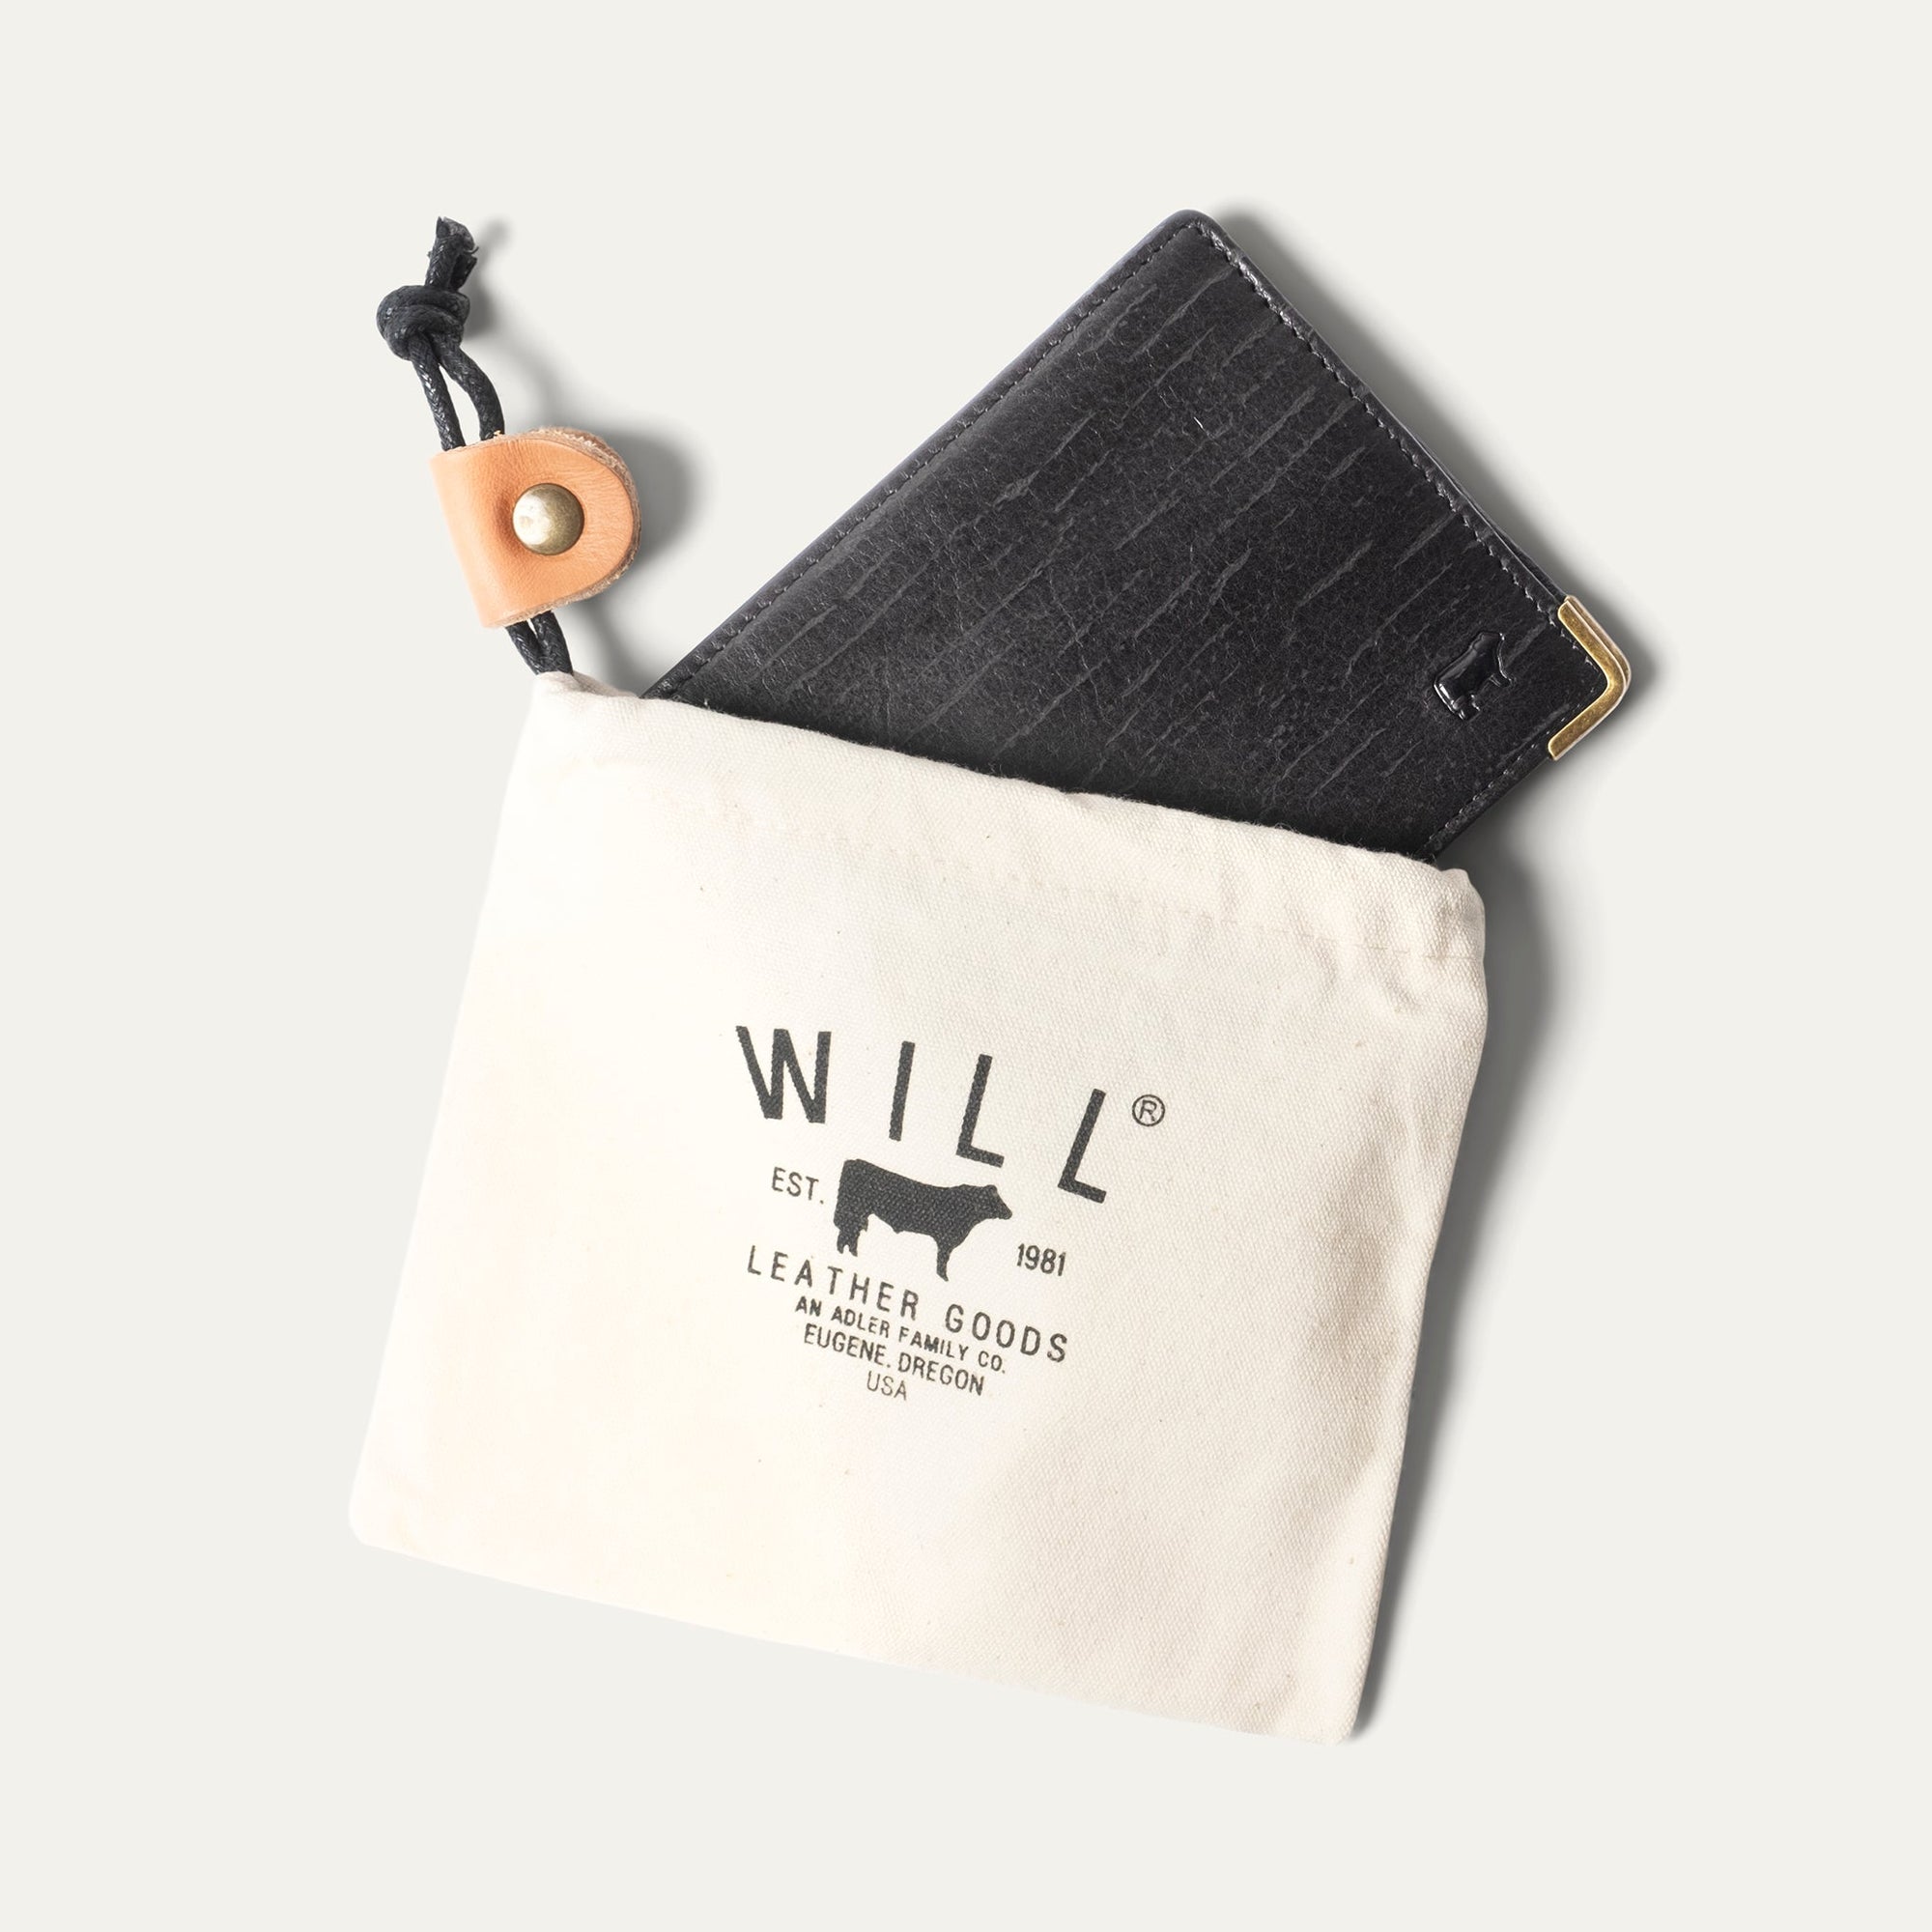 William Italian Leather Billfold Wallet in Black by Will Leather Goods